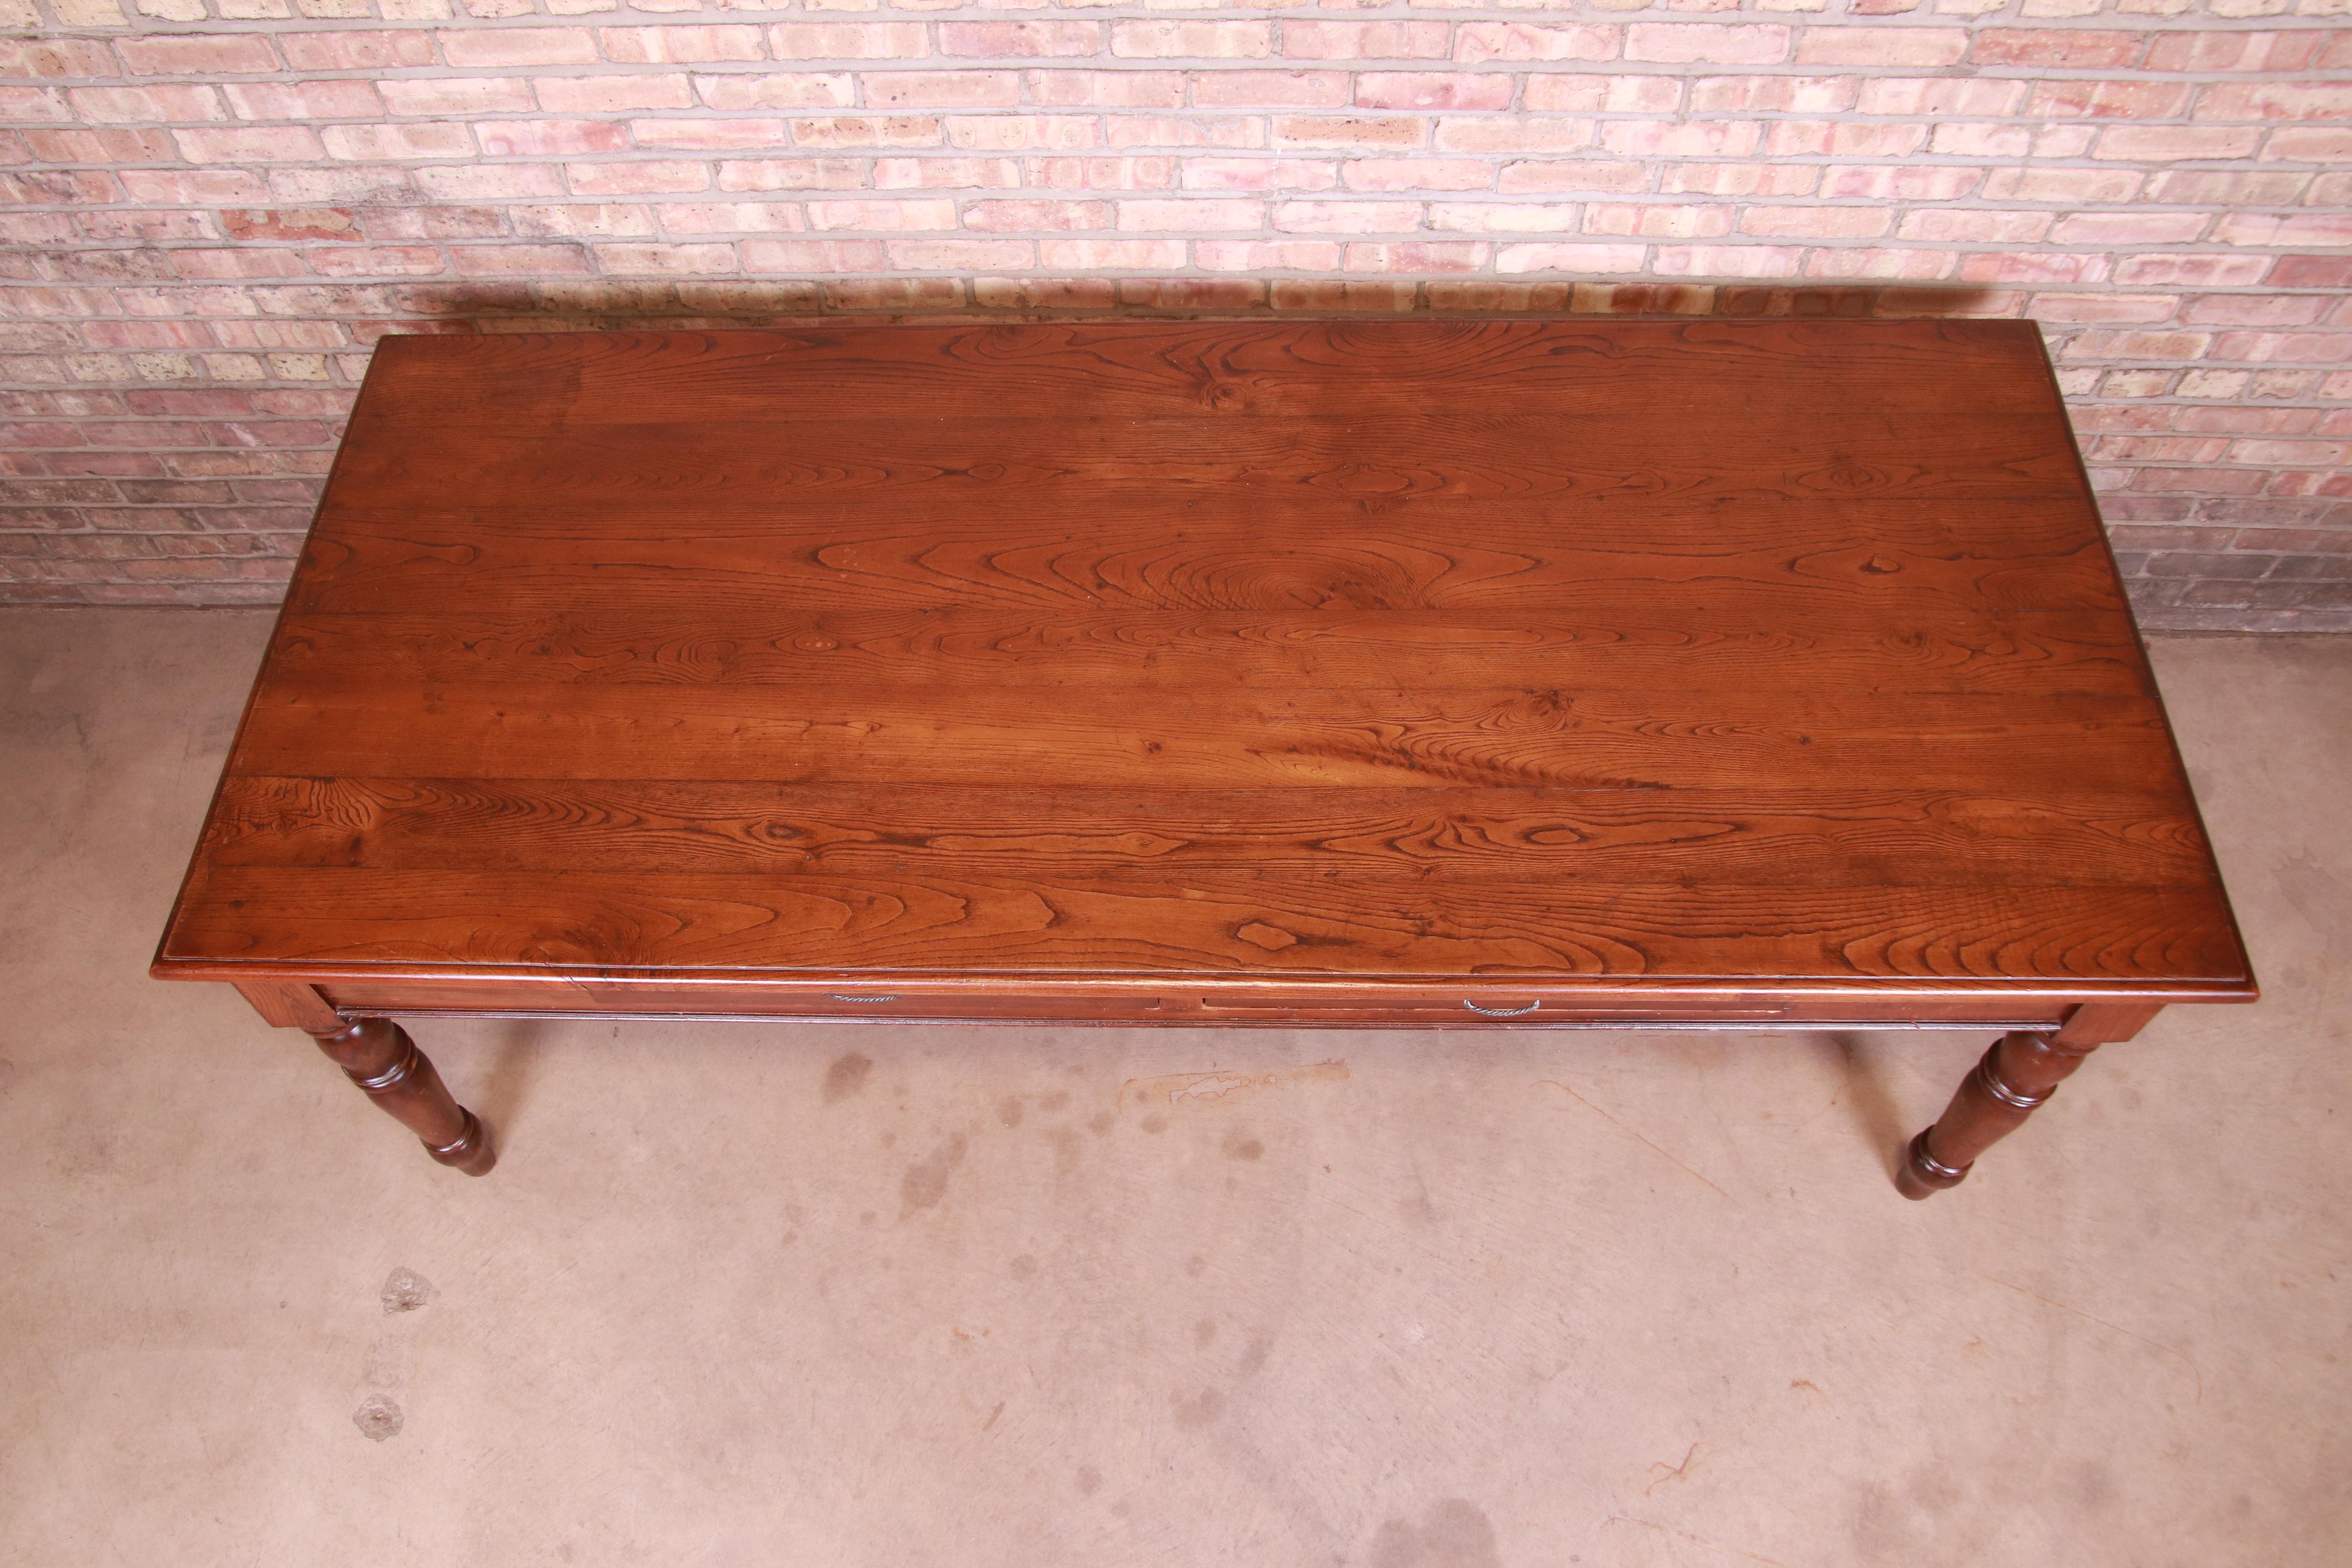 Antique French Provincial Elm Wood Harvest Farm Table With Drawers, Circa 1900 For Sale 1